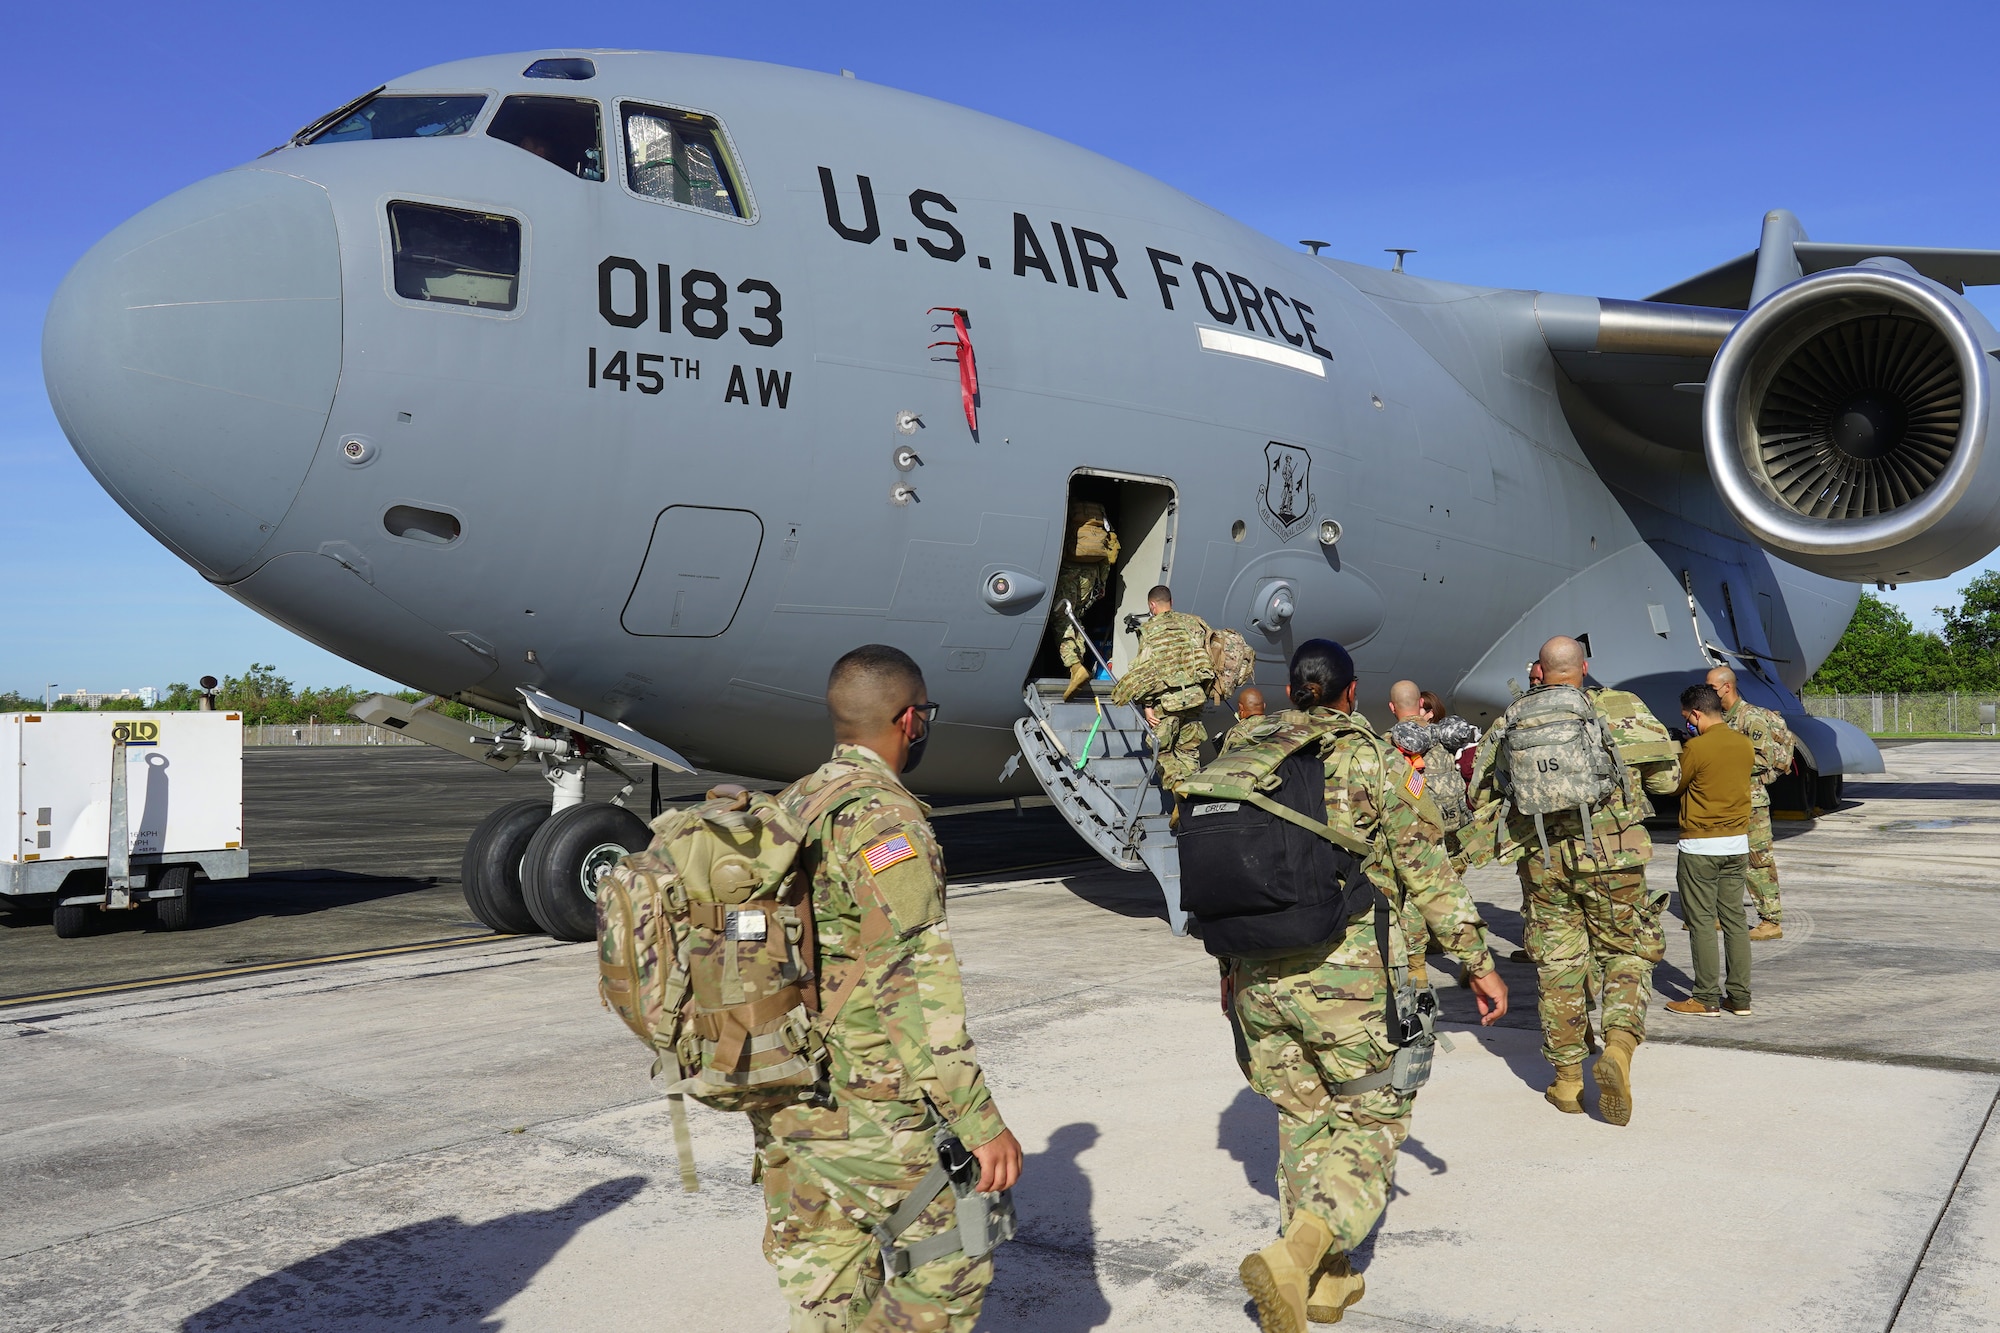 U.S. Army Soldiers with the 92nd Military Police Brigade, Puerto Rico Army National Guard, board a C-17 Globemaster III aircraft from the 145th Airlift Wing, to depart from Muñiz Air National Guard Base for Washington, D.C., in support of the 2021 presidential inauguration, Jan. 15, 2021.